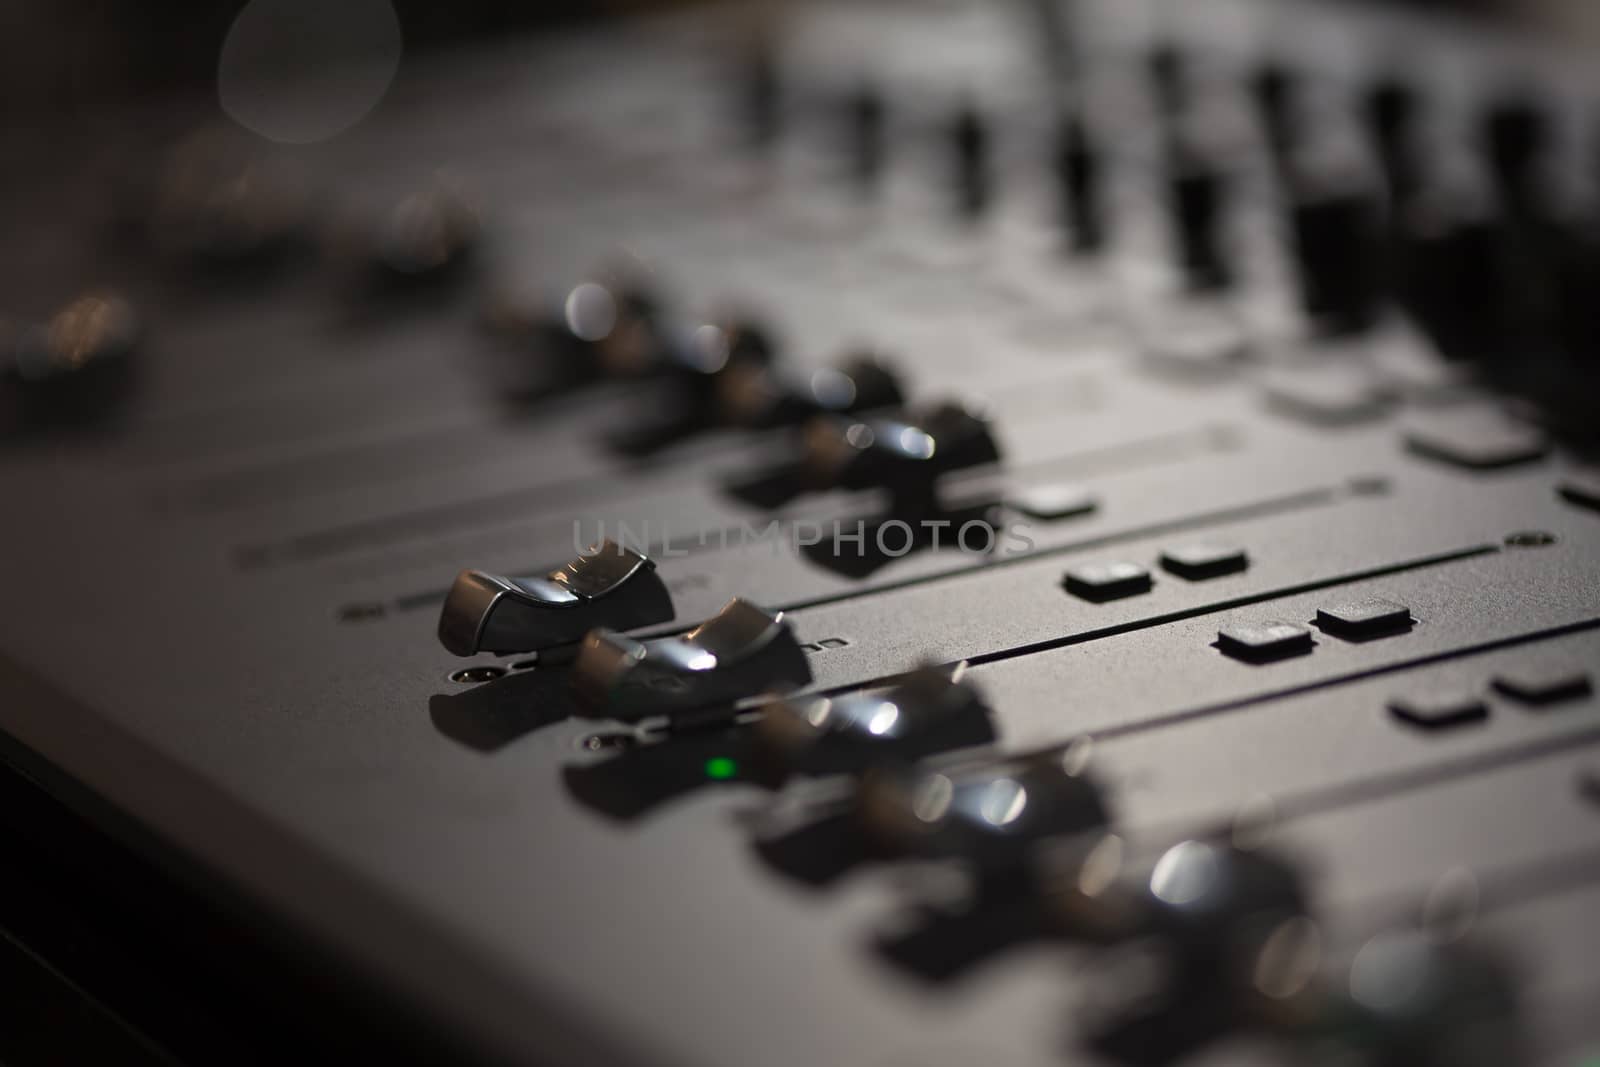 Audio mixing console by tdhster